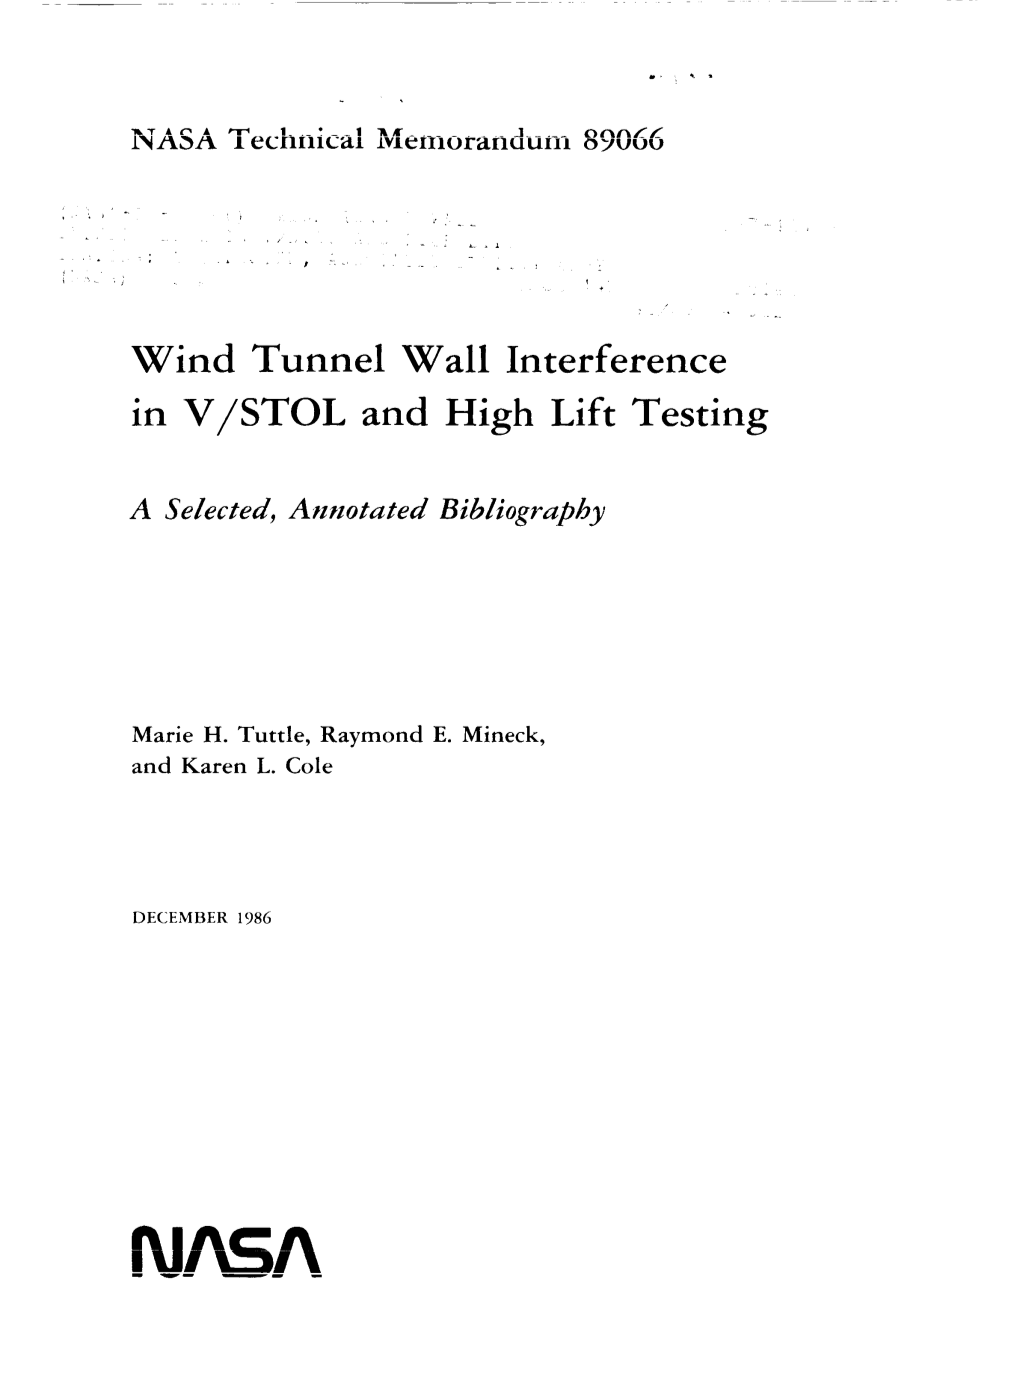 Wind Tunnel Wall Interference in V/STOL and High Lift Testing